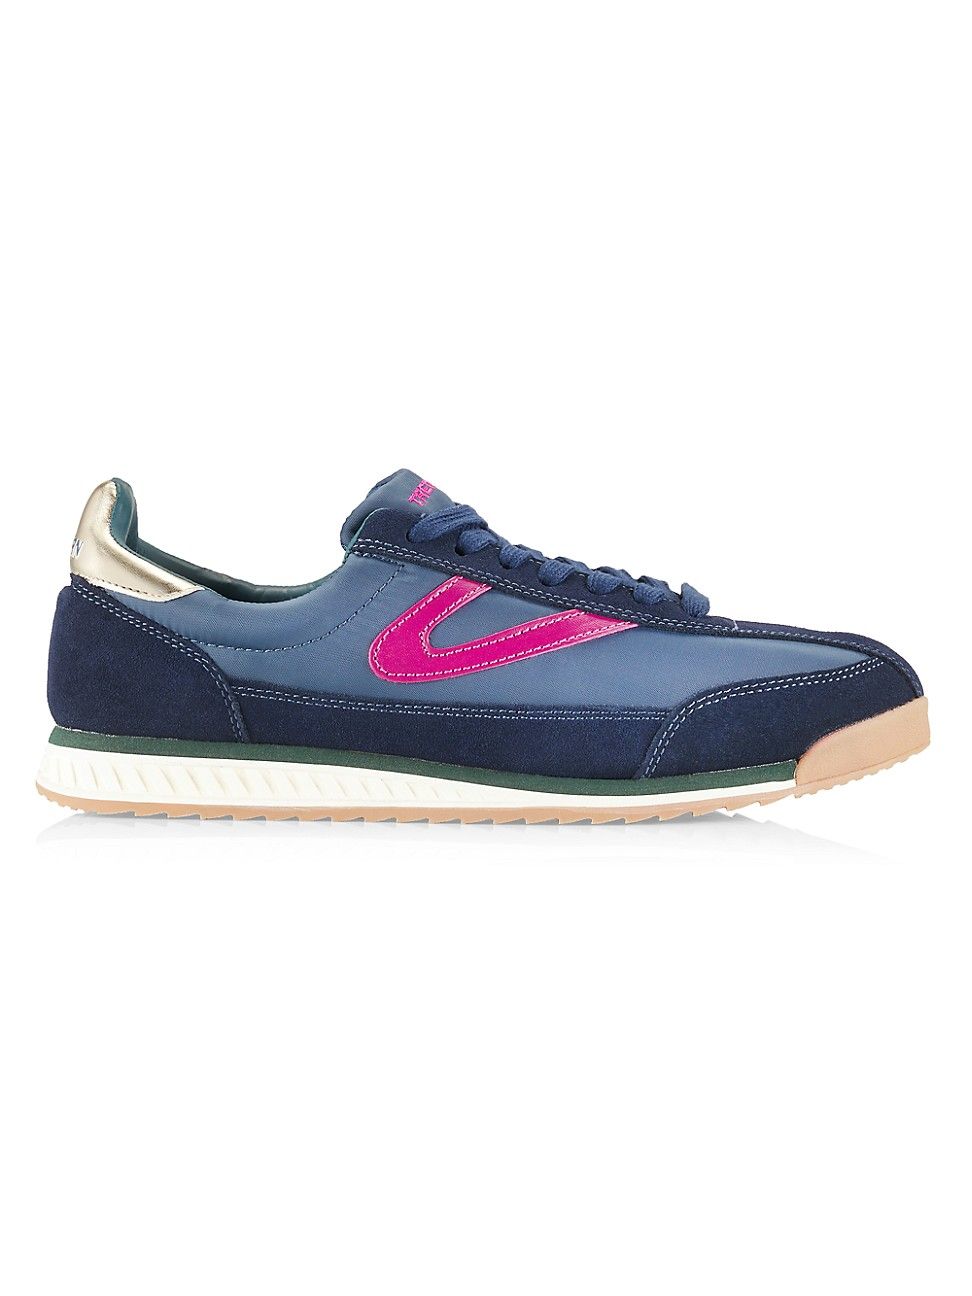 Women's Rawlins 2.0 Sneakers - Navy Pink - Size 7.5 | Saks Fifth Avenue